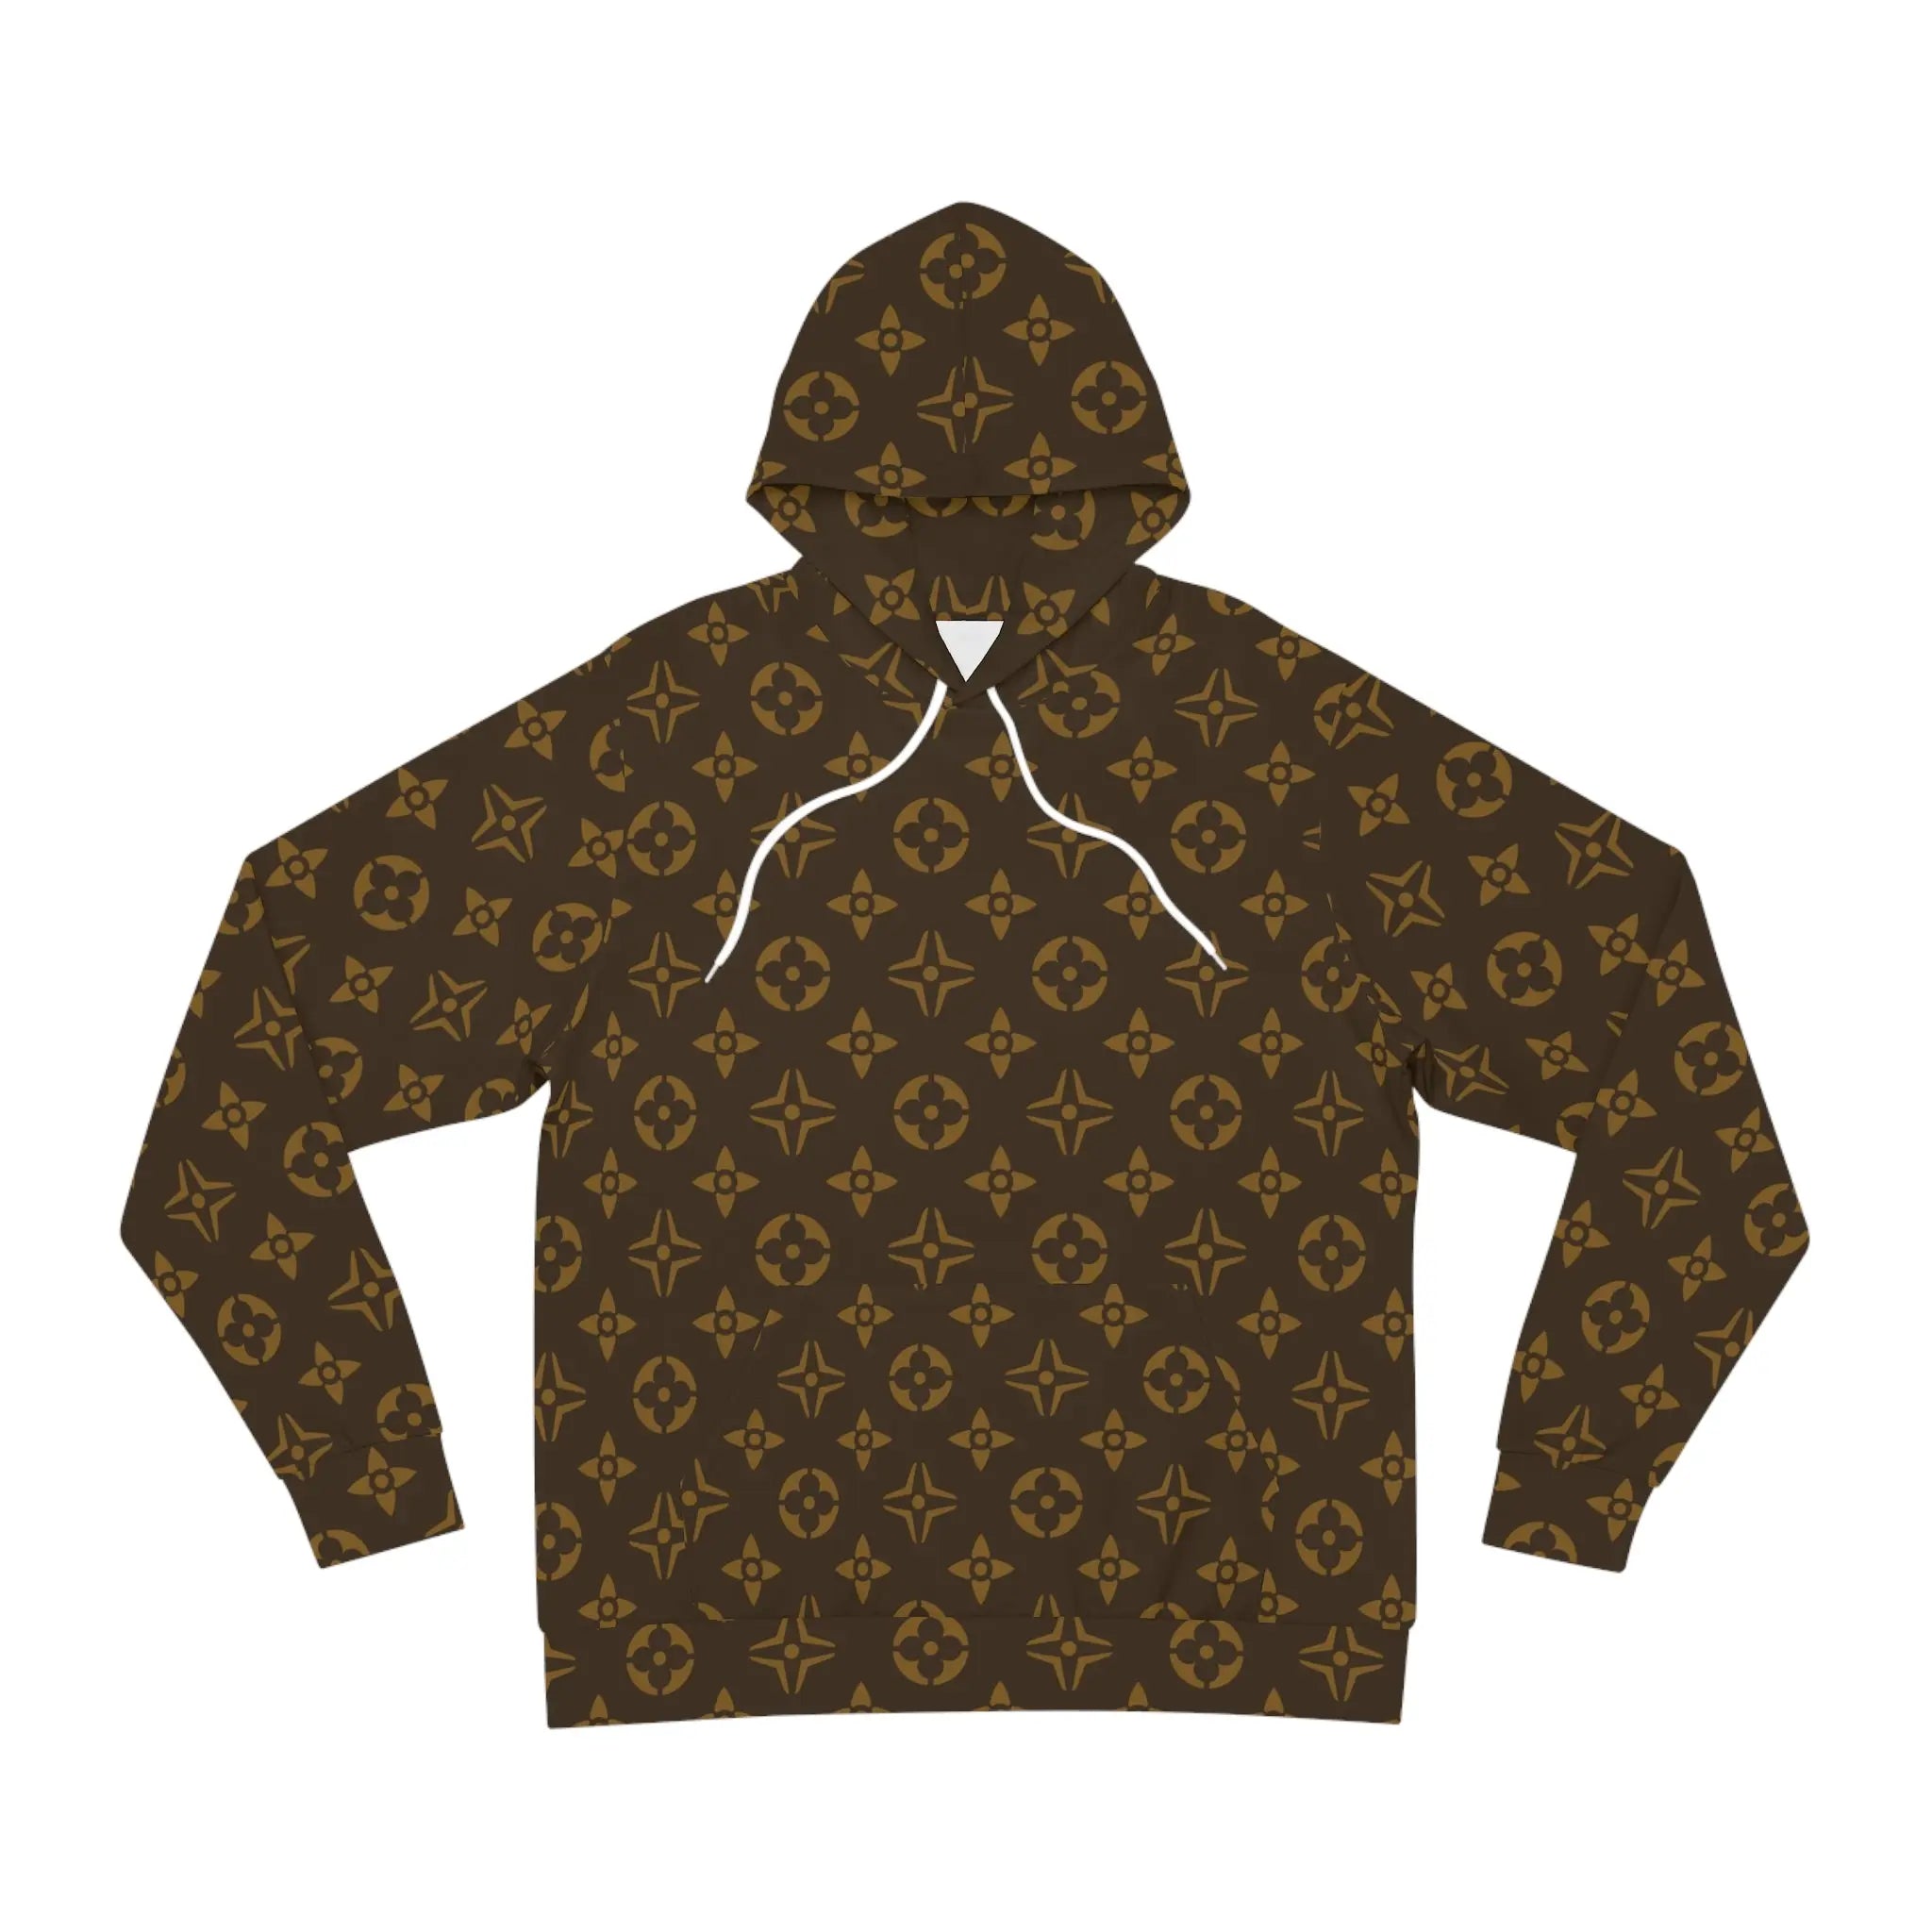  Abby Pattern Icons in Brown Unisex Fashion Hoodie, Hooded Sweater, Streetwear Hooded Sweatshirt HoodieMSeamthreadcolorautomaticallymatchedtodesign